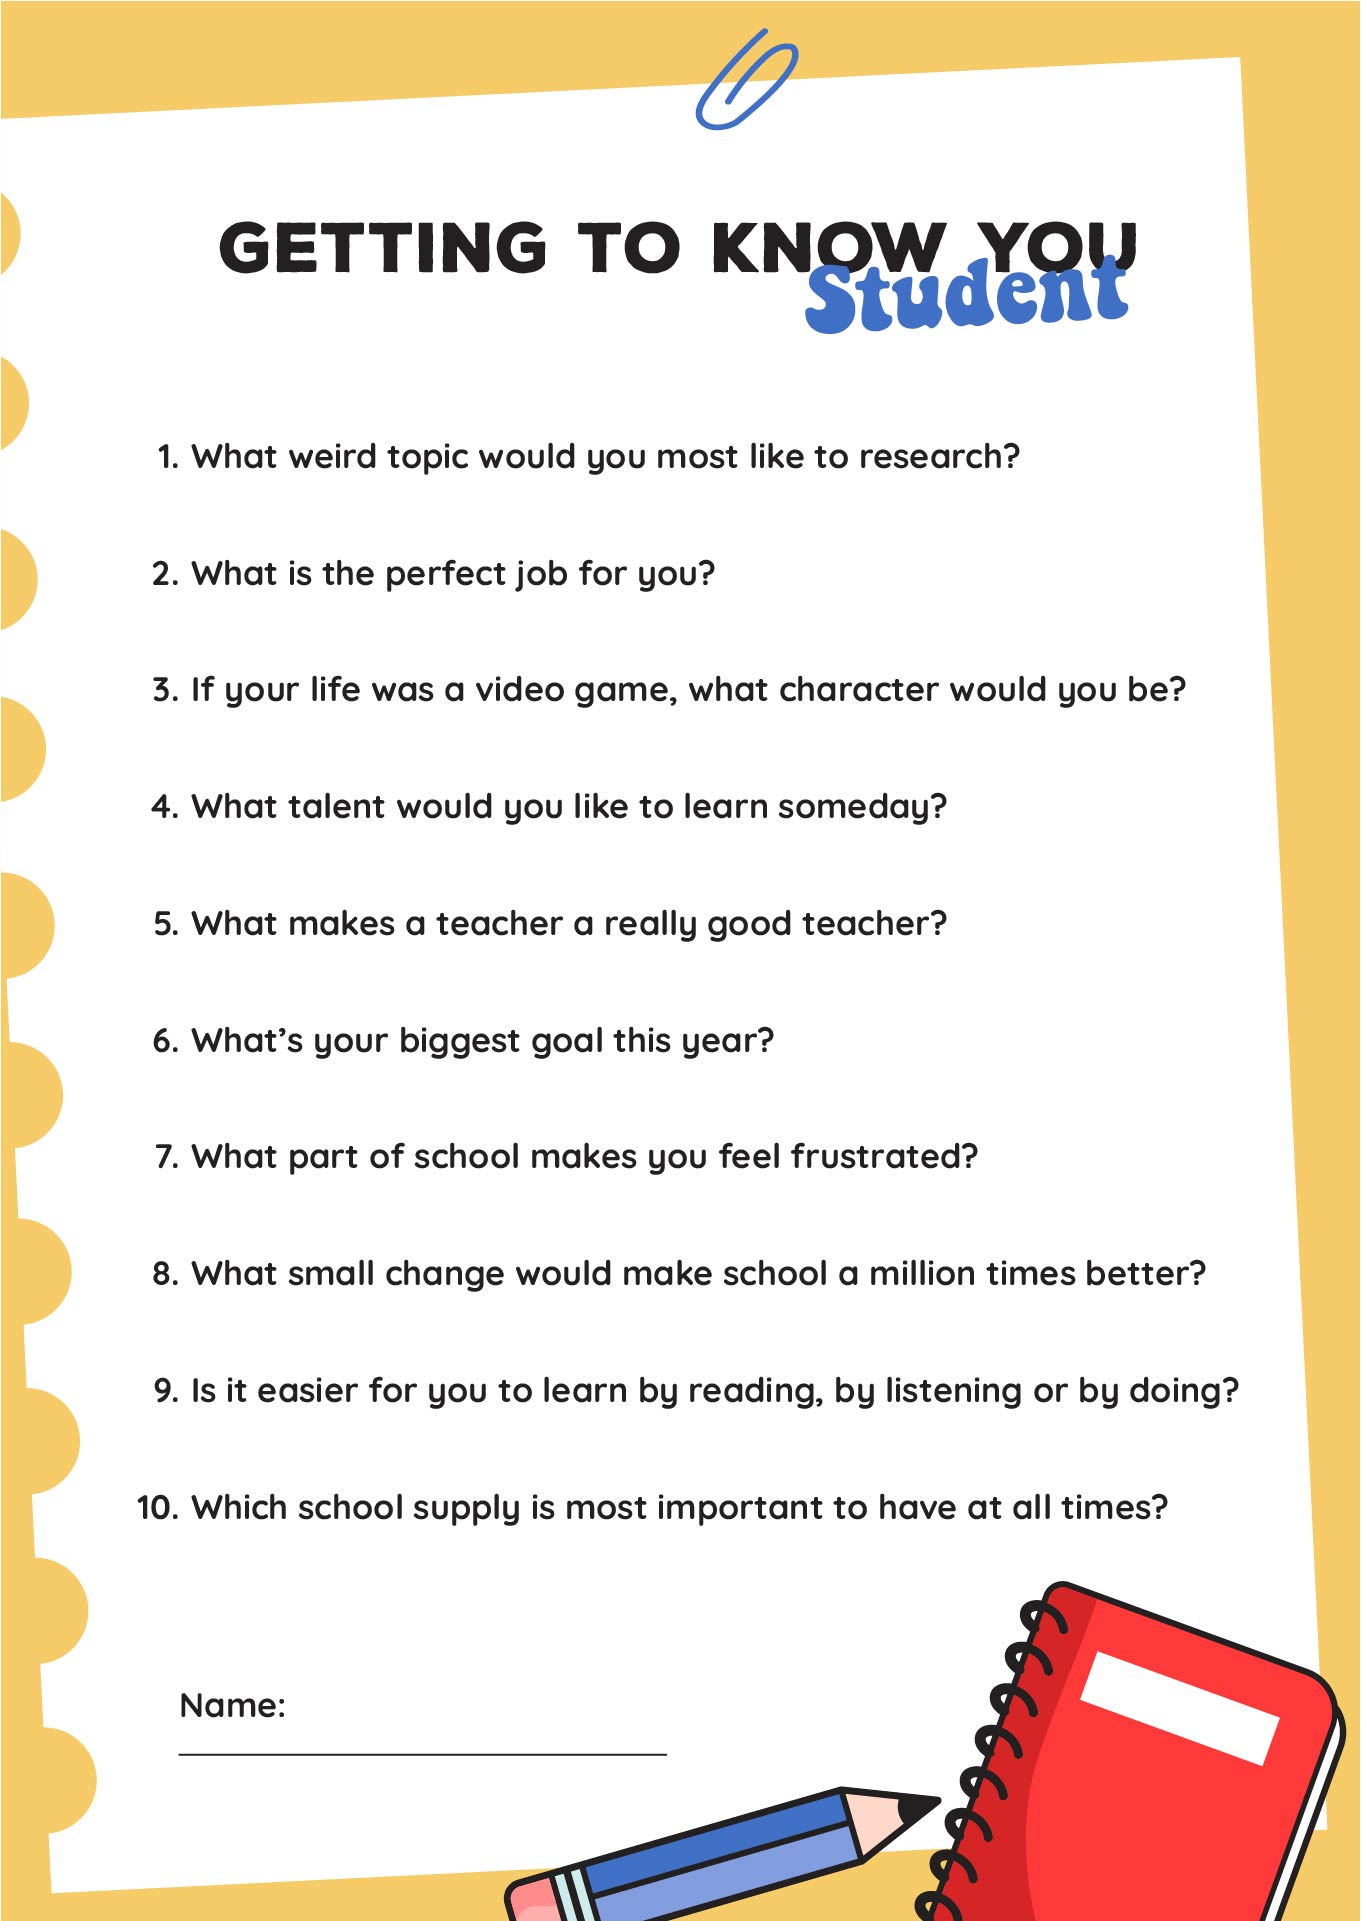 Getting to Know You Questions for Students